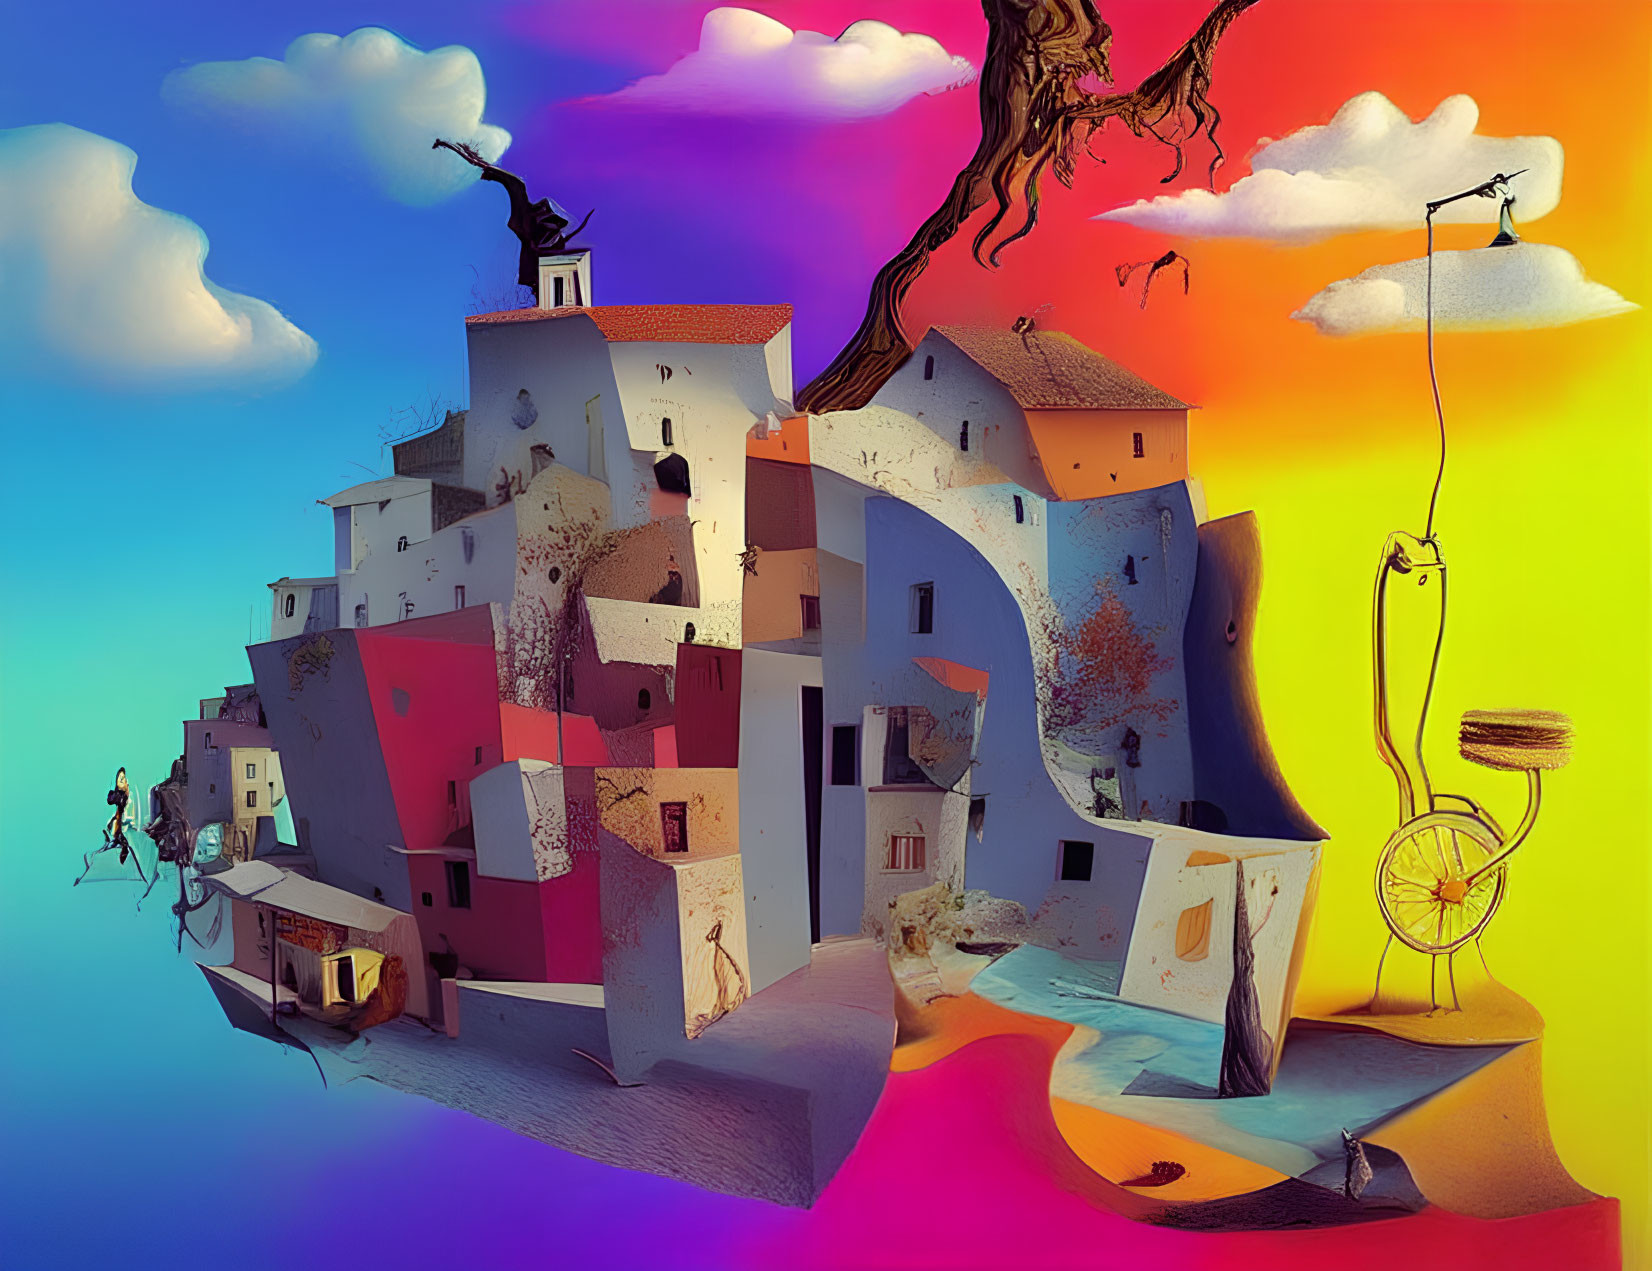 Colorful surreal artwork: twisted village, floating clouds, large tree, abstract elements like hanging bicycle